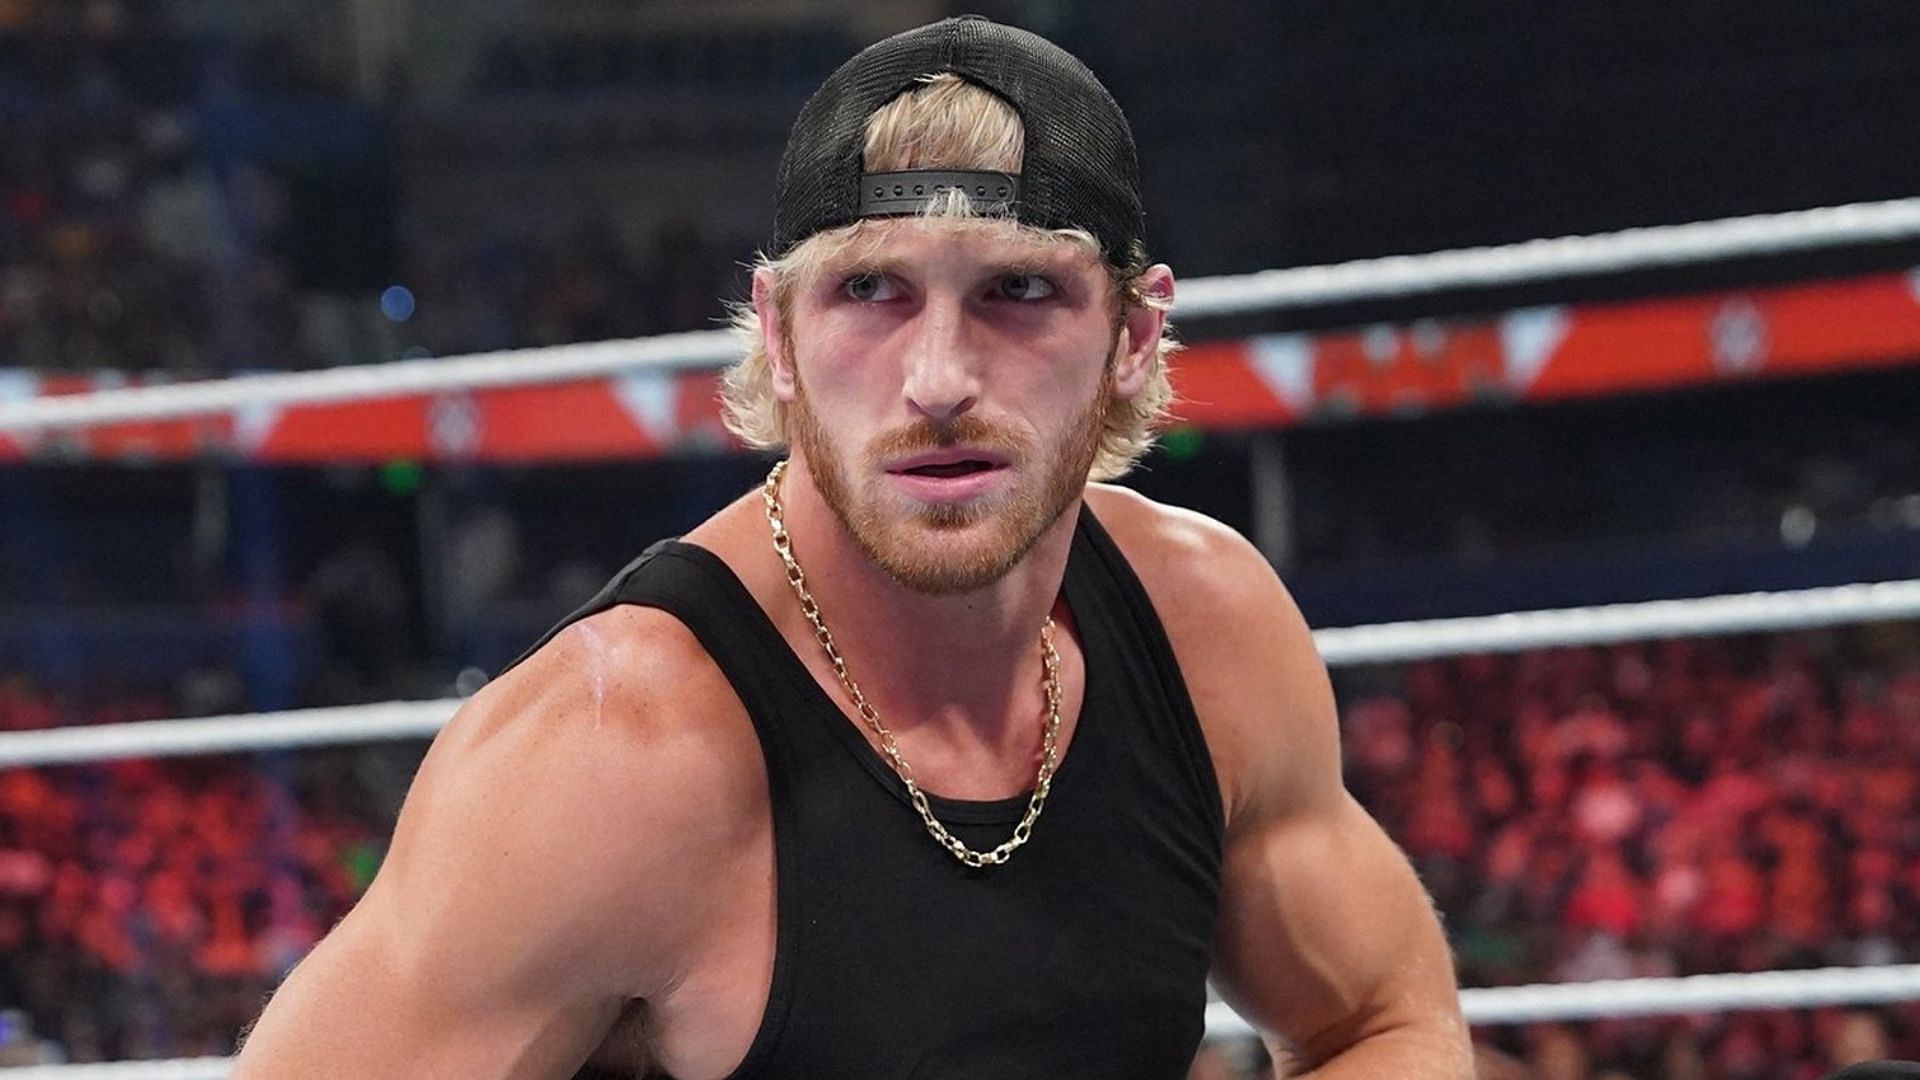 Logan Paul has profanity-filled response to being called out by WWE fan